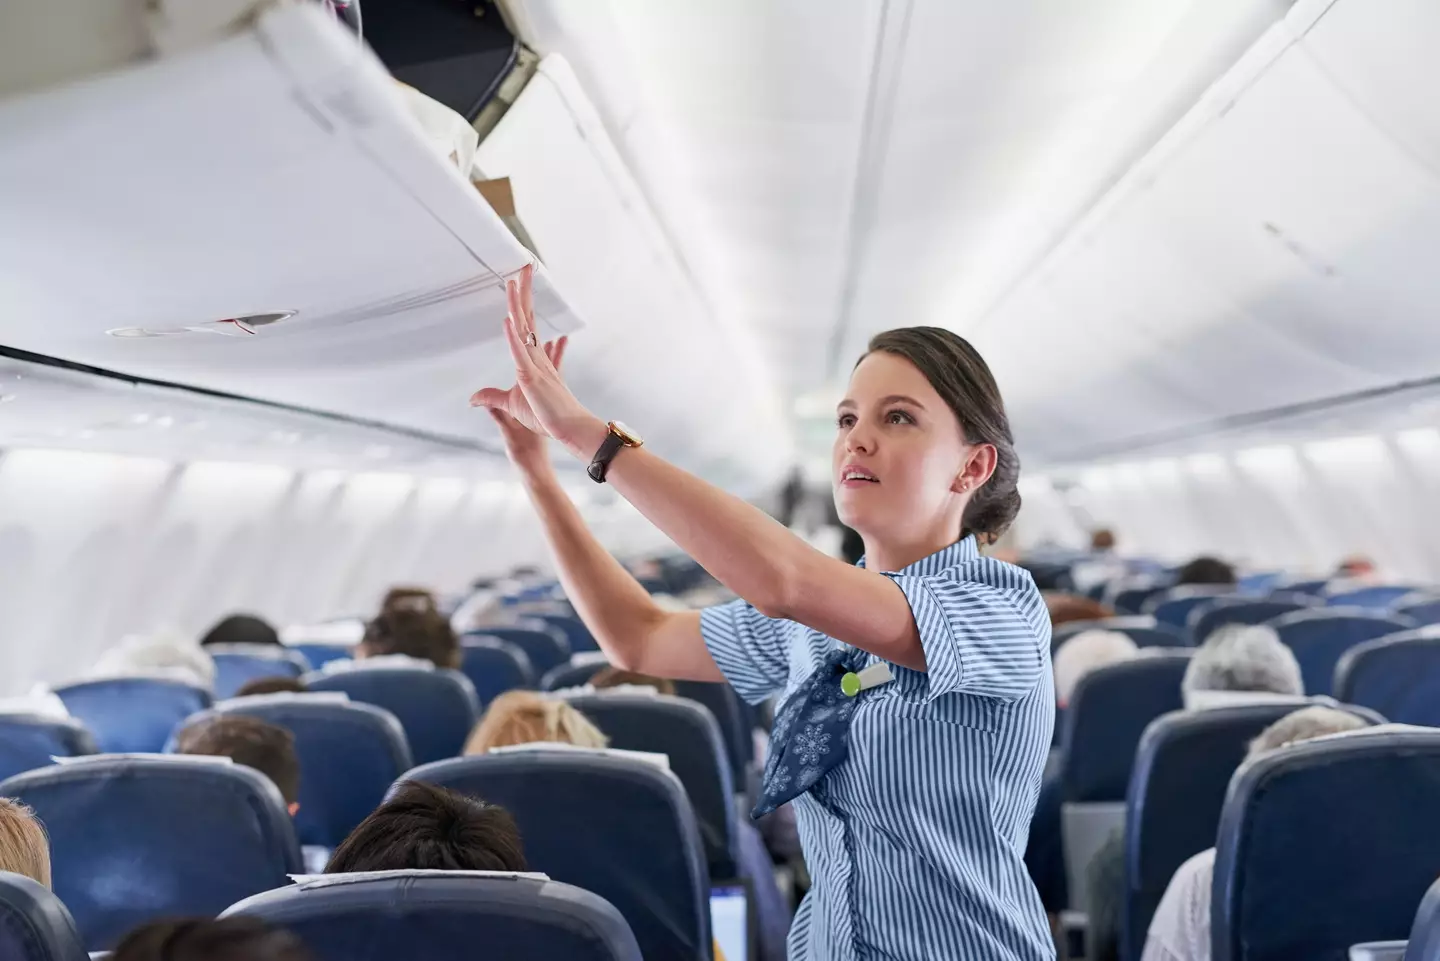 A flight attendant has revealed the one phrase you don't want to hear.